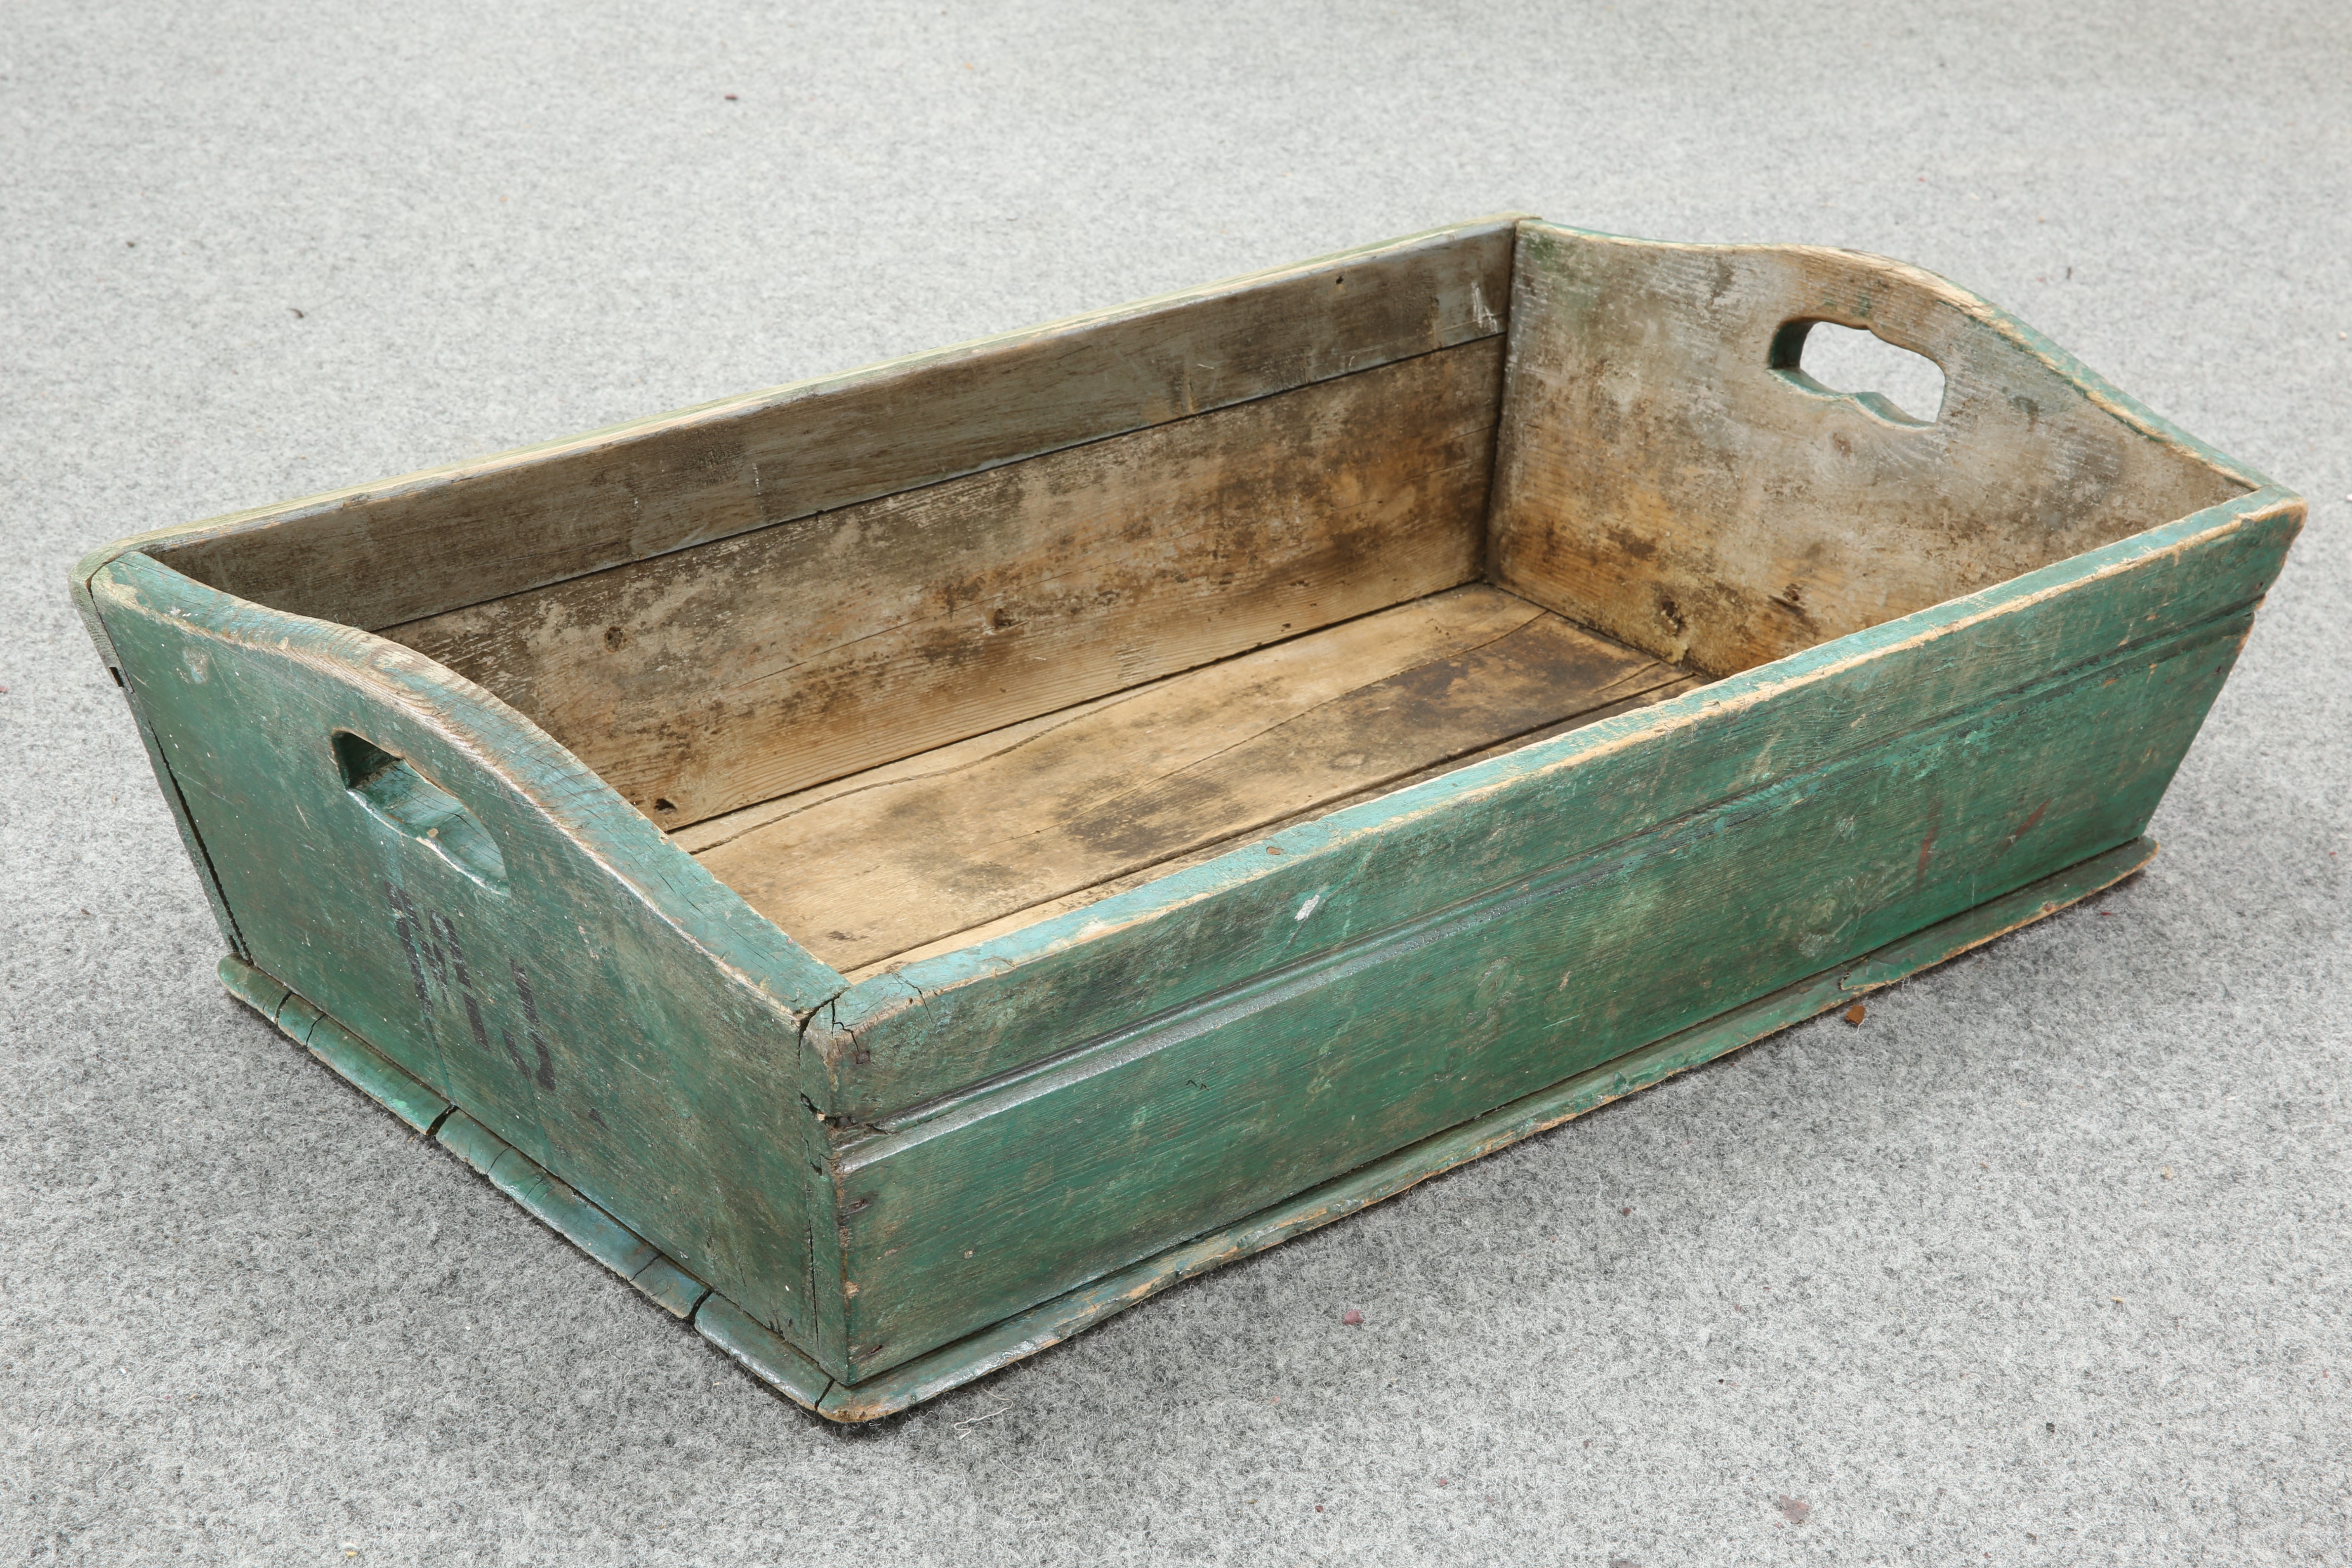 A VICTORIAN PAINTED TRUG, with cut-out handles. 76.5cm long